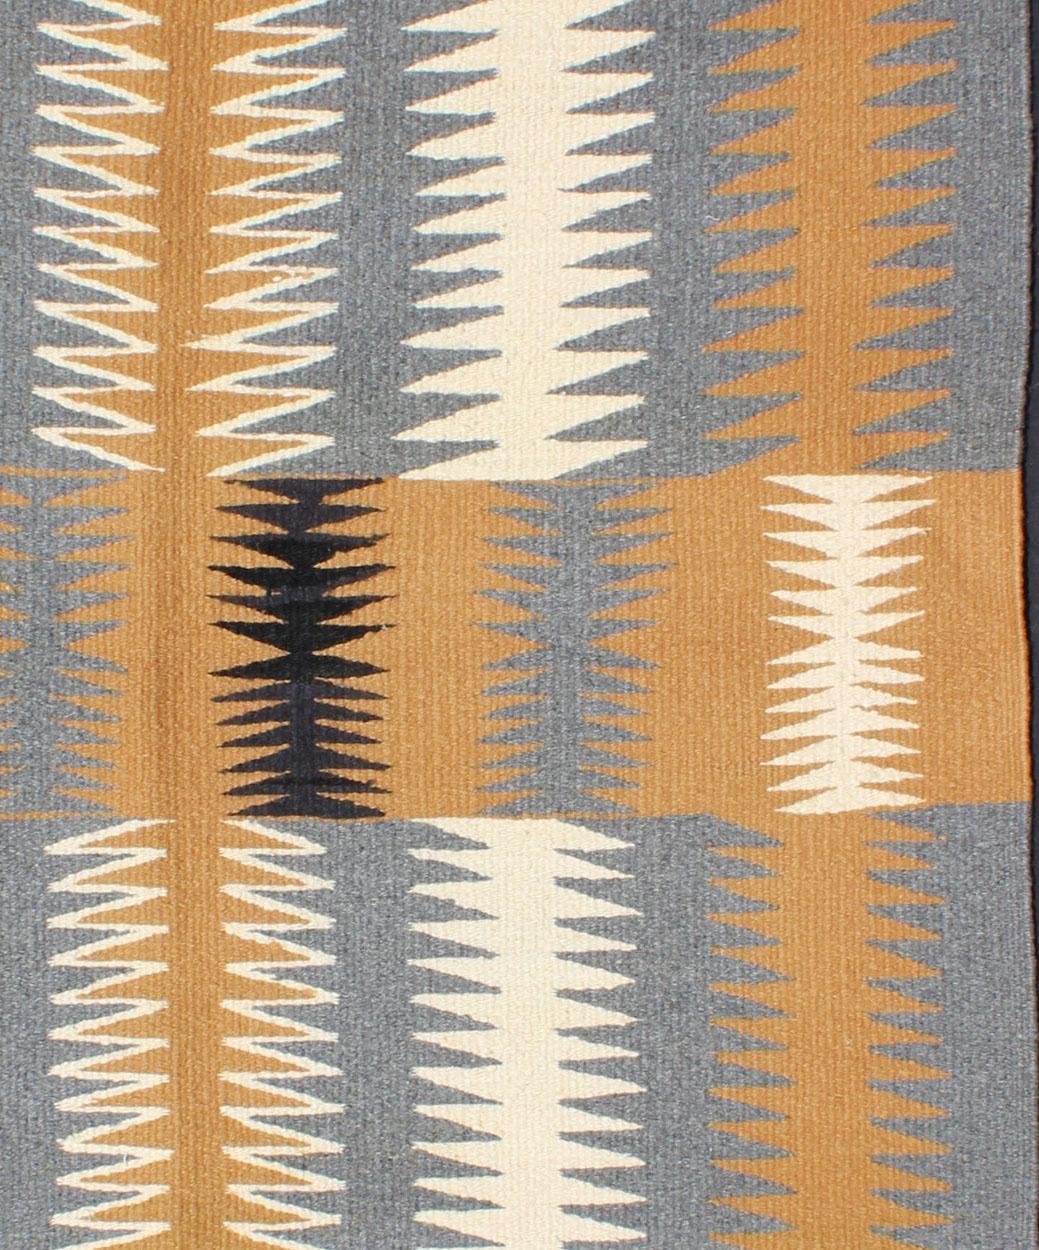 This intriguing antique Navajo Kilim, circa 1940 was woven in the United States during the first half of the 20th century. The exciting and unique composition boasts a captivating geometric composition with an all-over zig-zag design. The range of